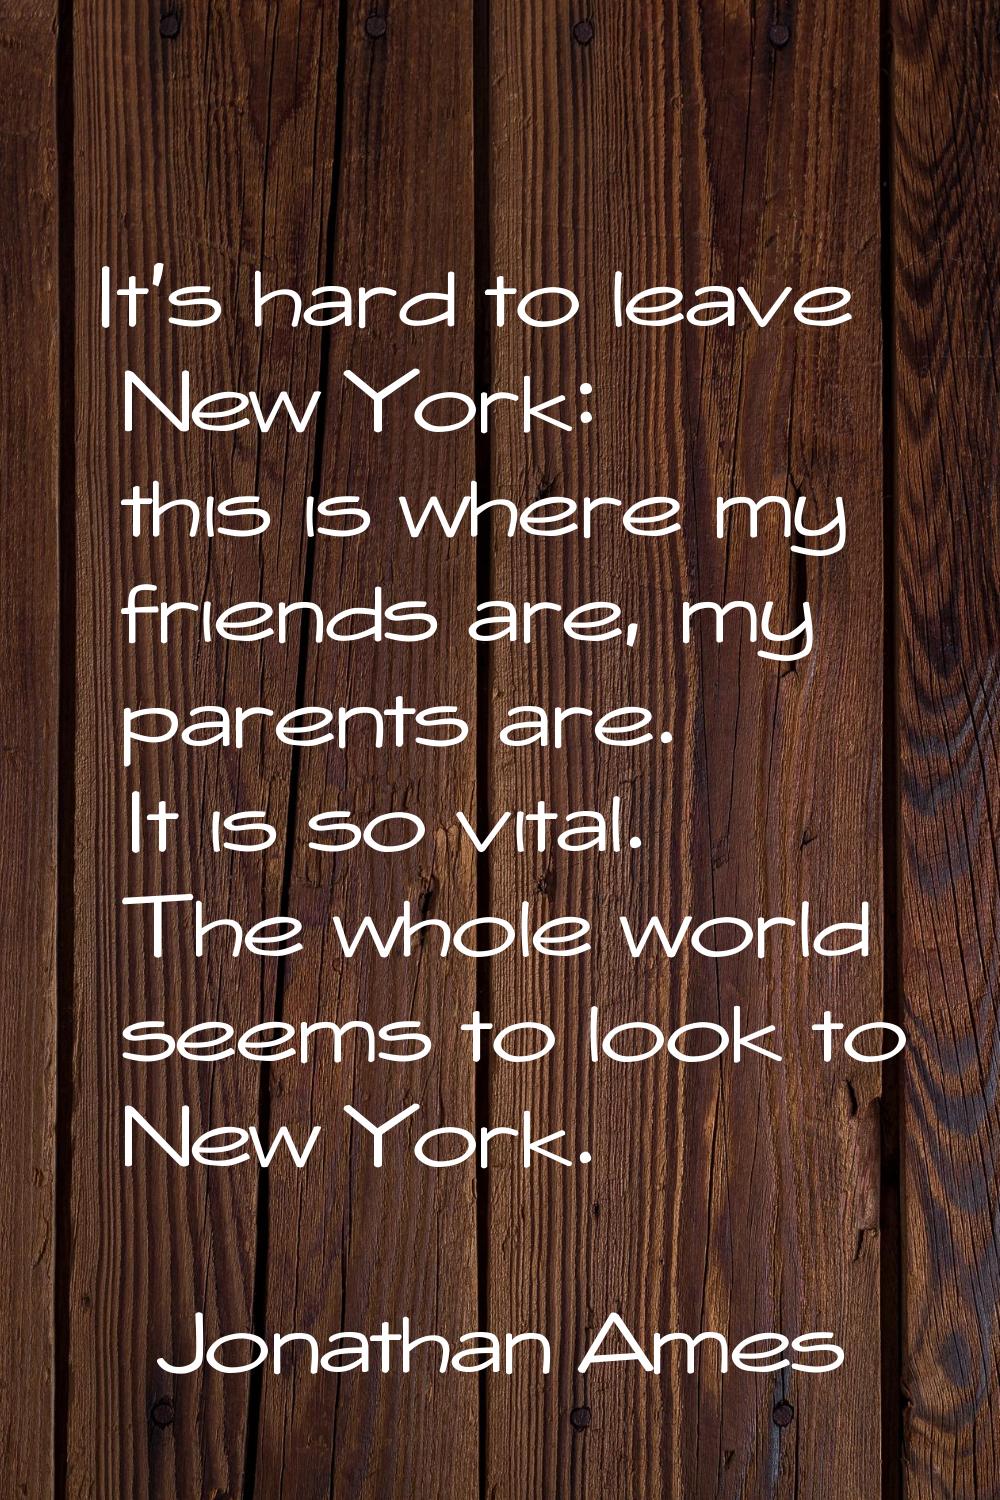 It's hard to leave New York: this is where my friends are, my parents are. It is so vital. The whol